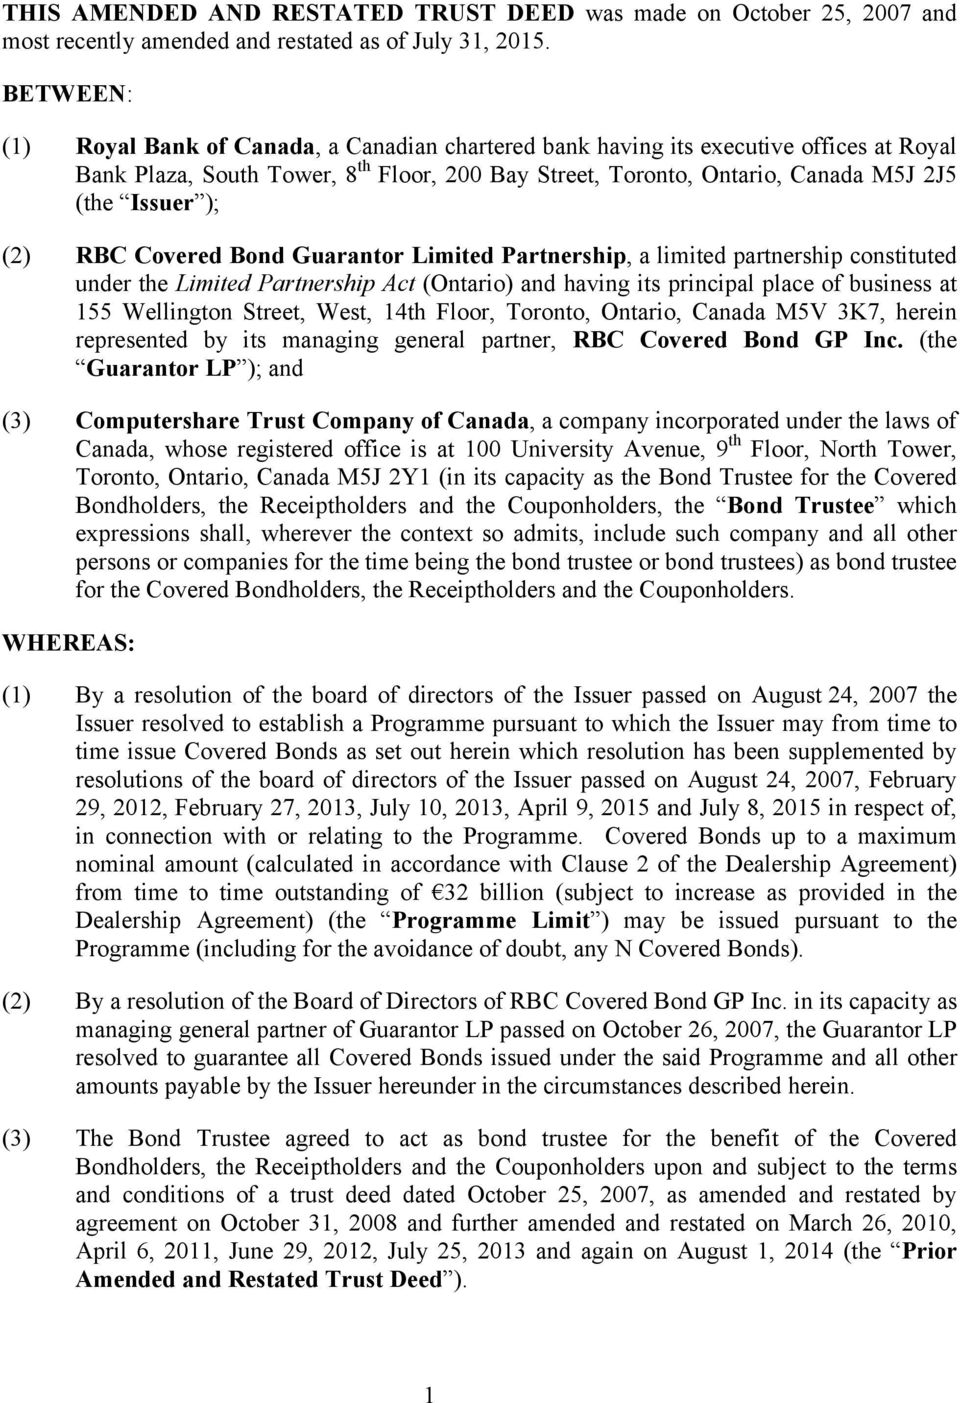 (2) RBC Covered Bond Guarantor Limited Partnership, a limited partnership constituted under the Limited Partnership Act (Ontario) and having its principal place of business at 155 Wellington Street,